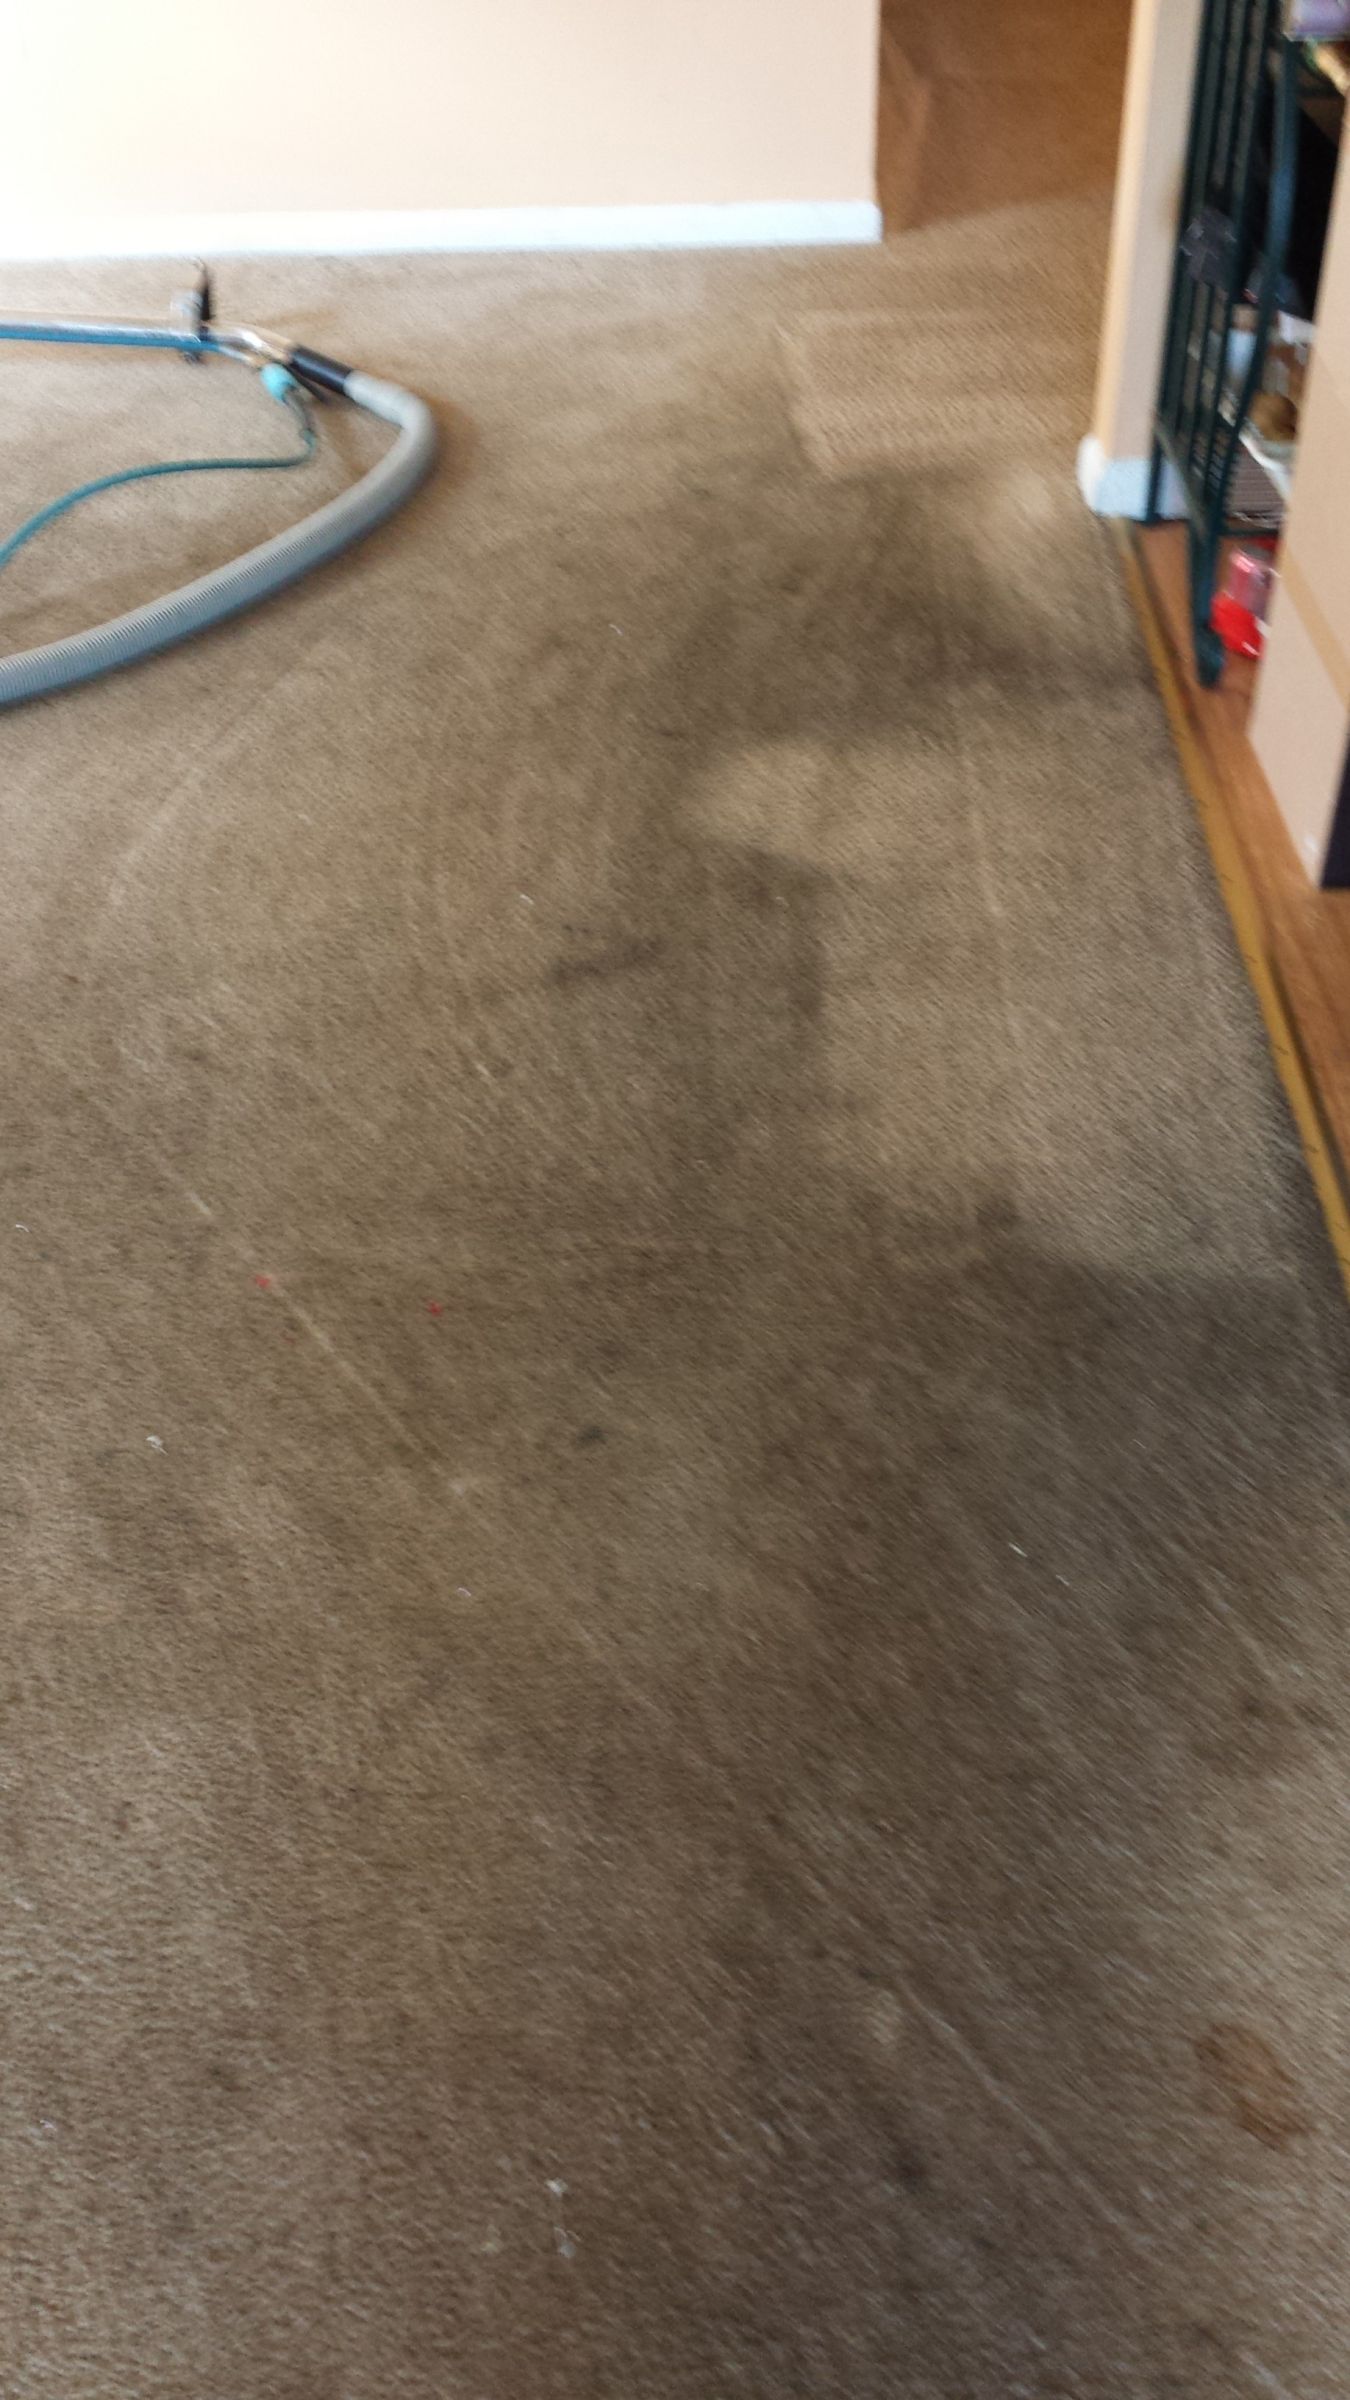 Expert Carpet Cleaners to Fix Flood Water